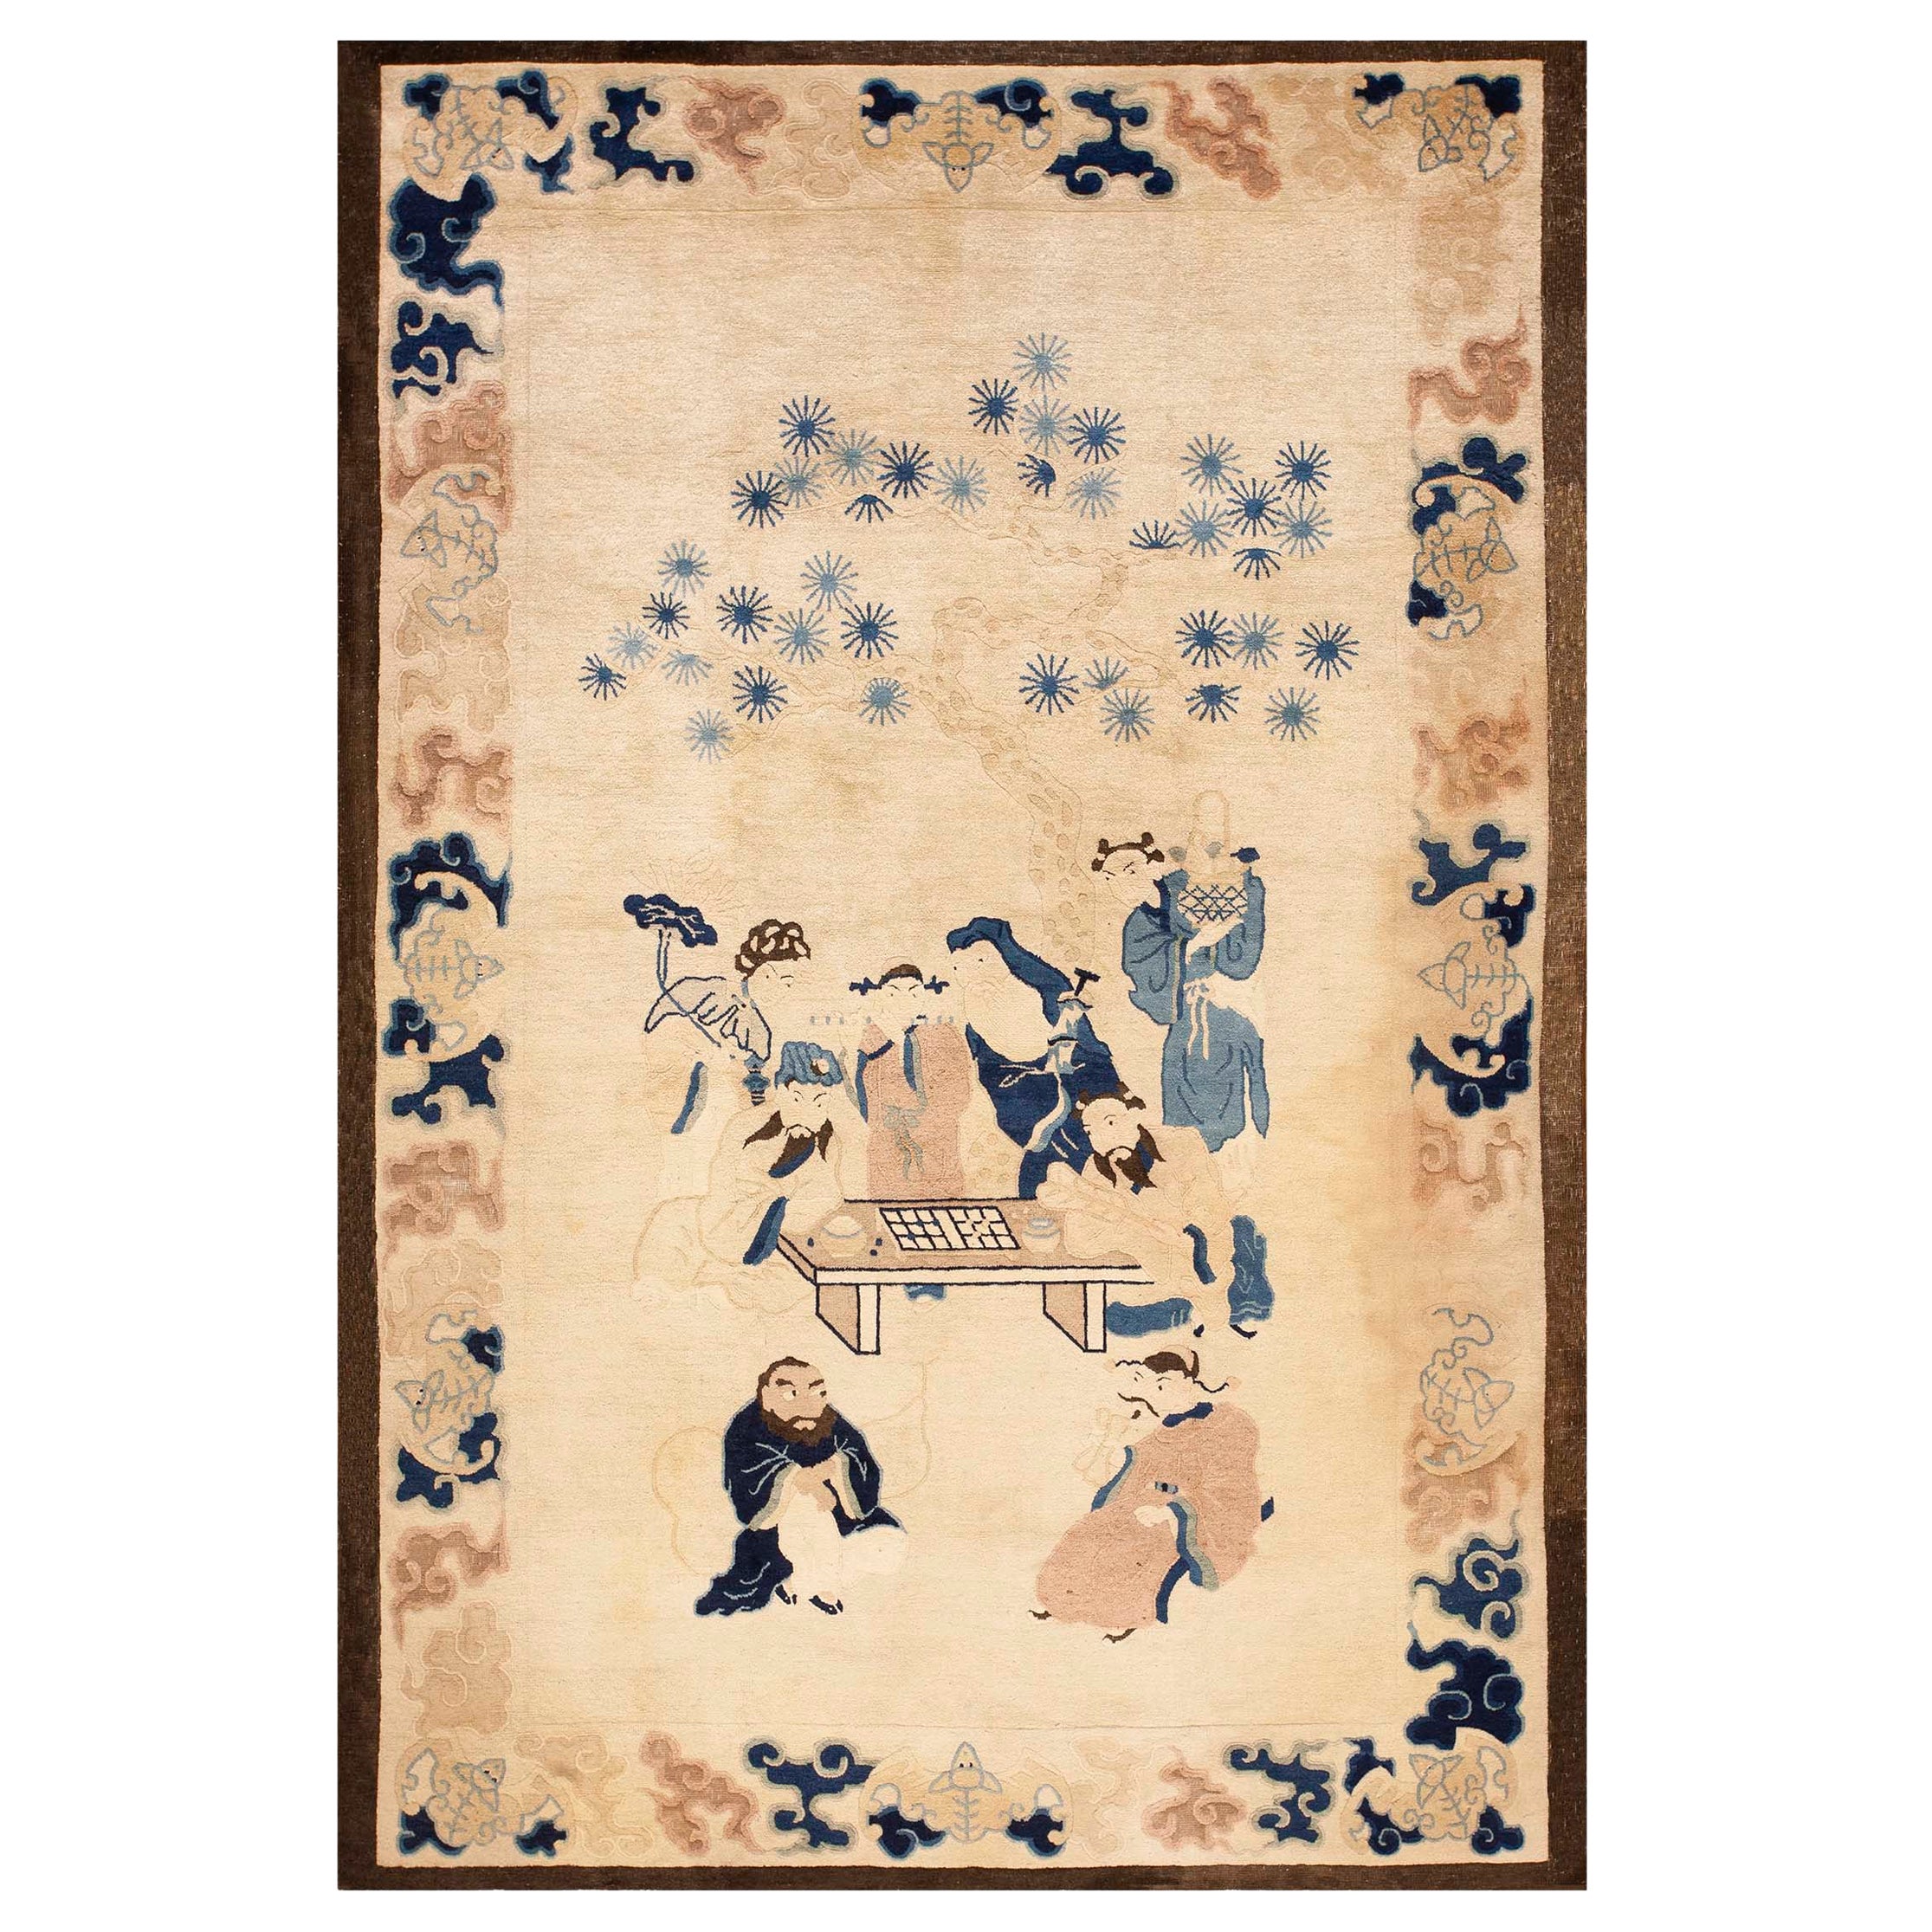 Early 20th Century Chinese Peking Carpet with Eight Immortals Playing Weiqi "Go" For Sale